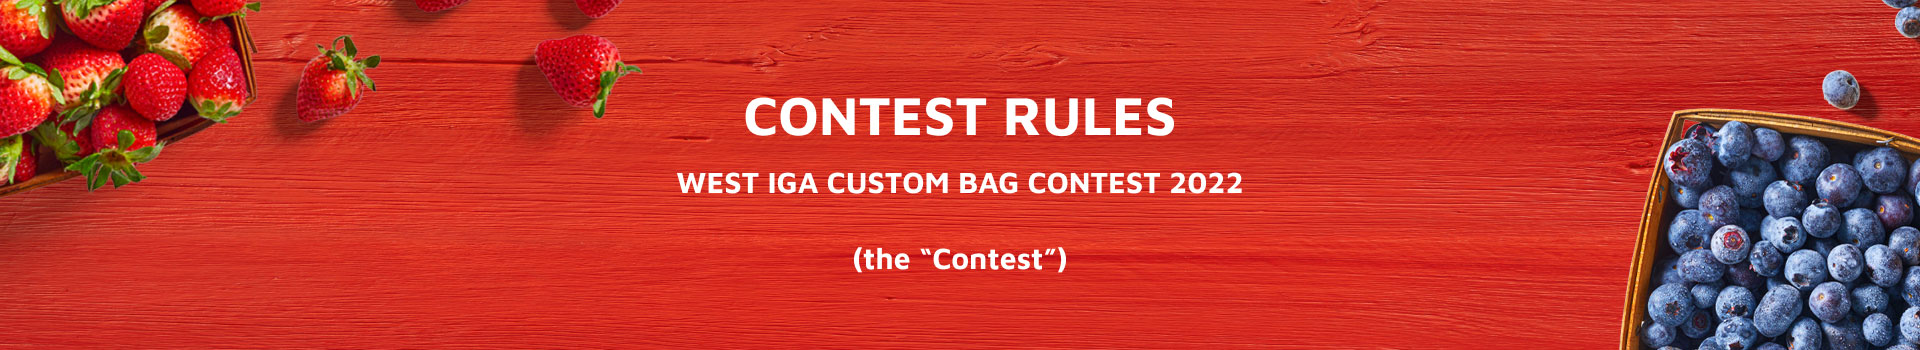 IGA Contest Rules Banner